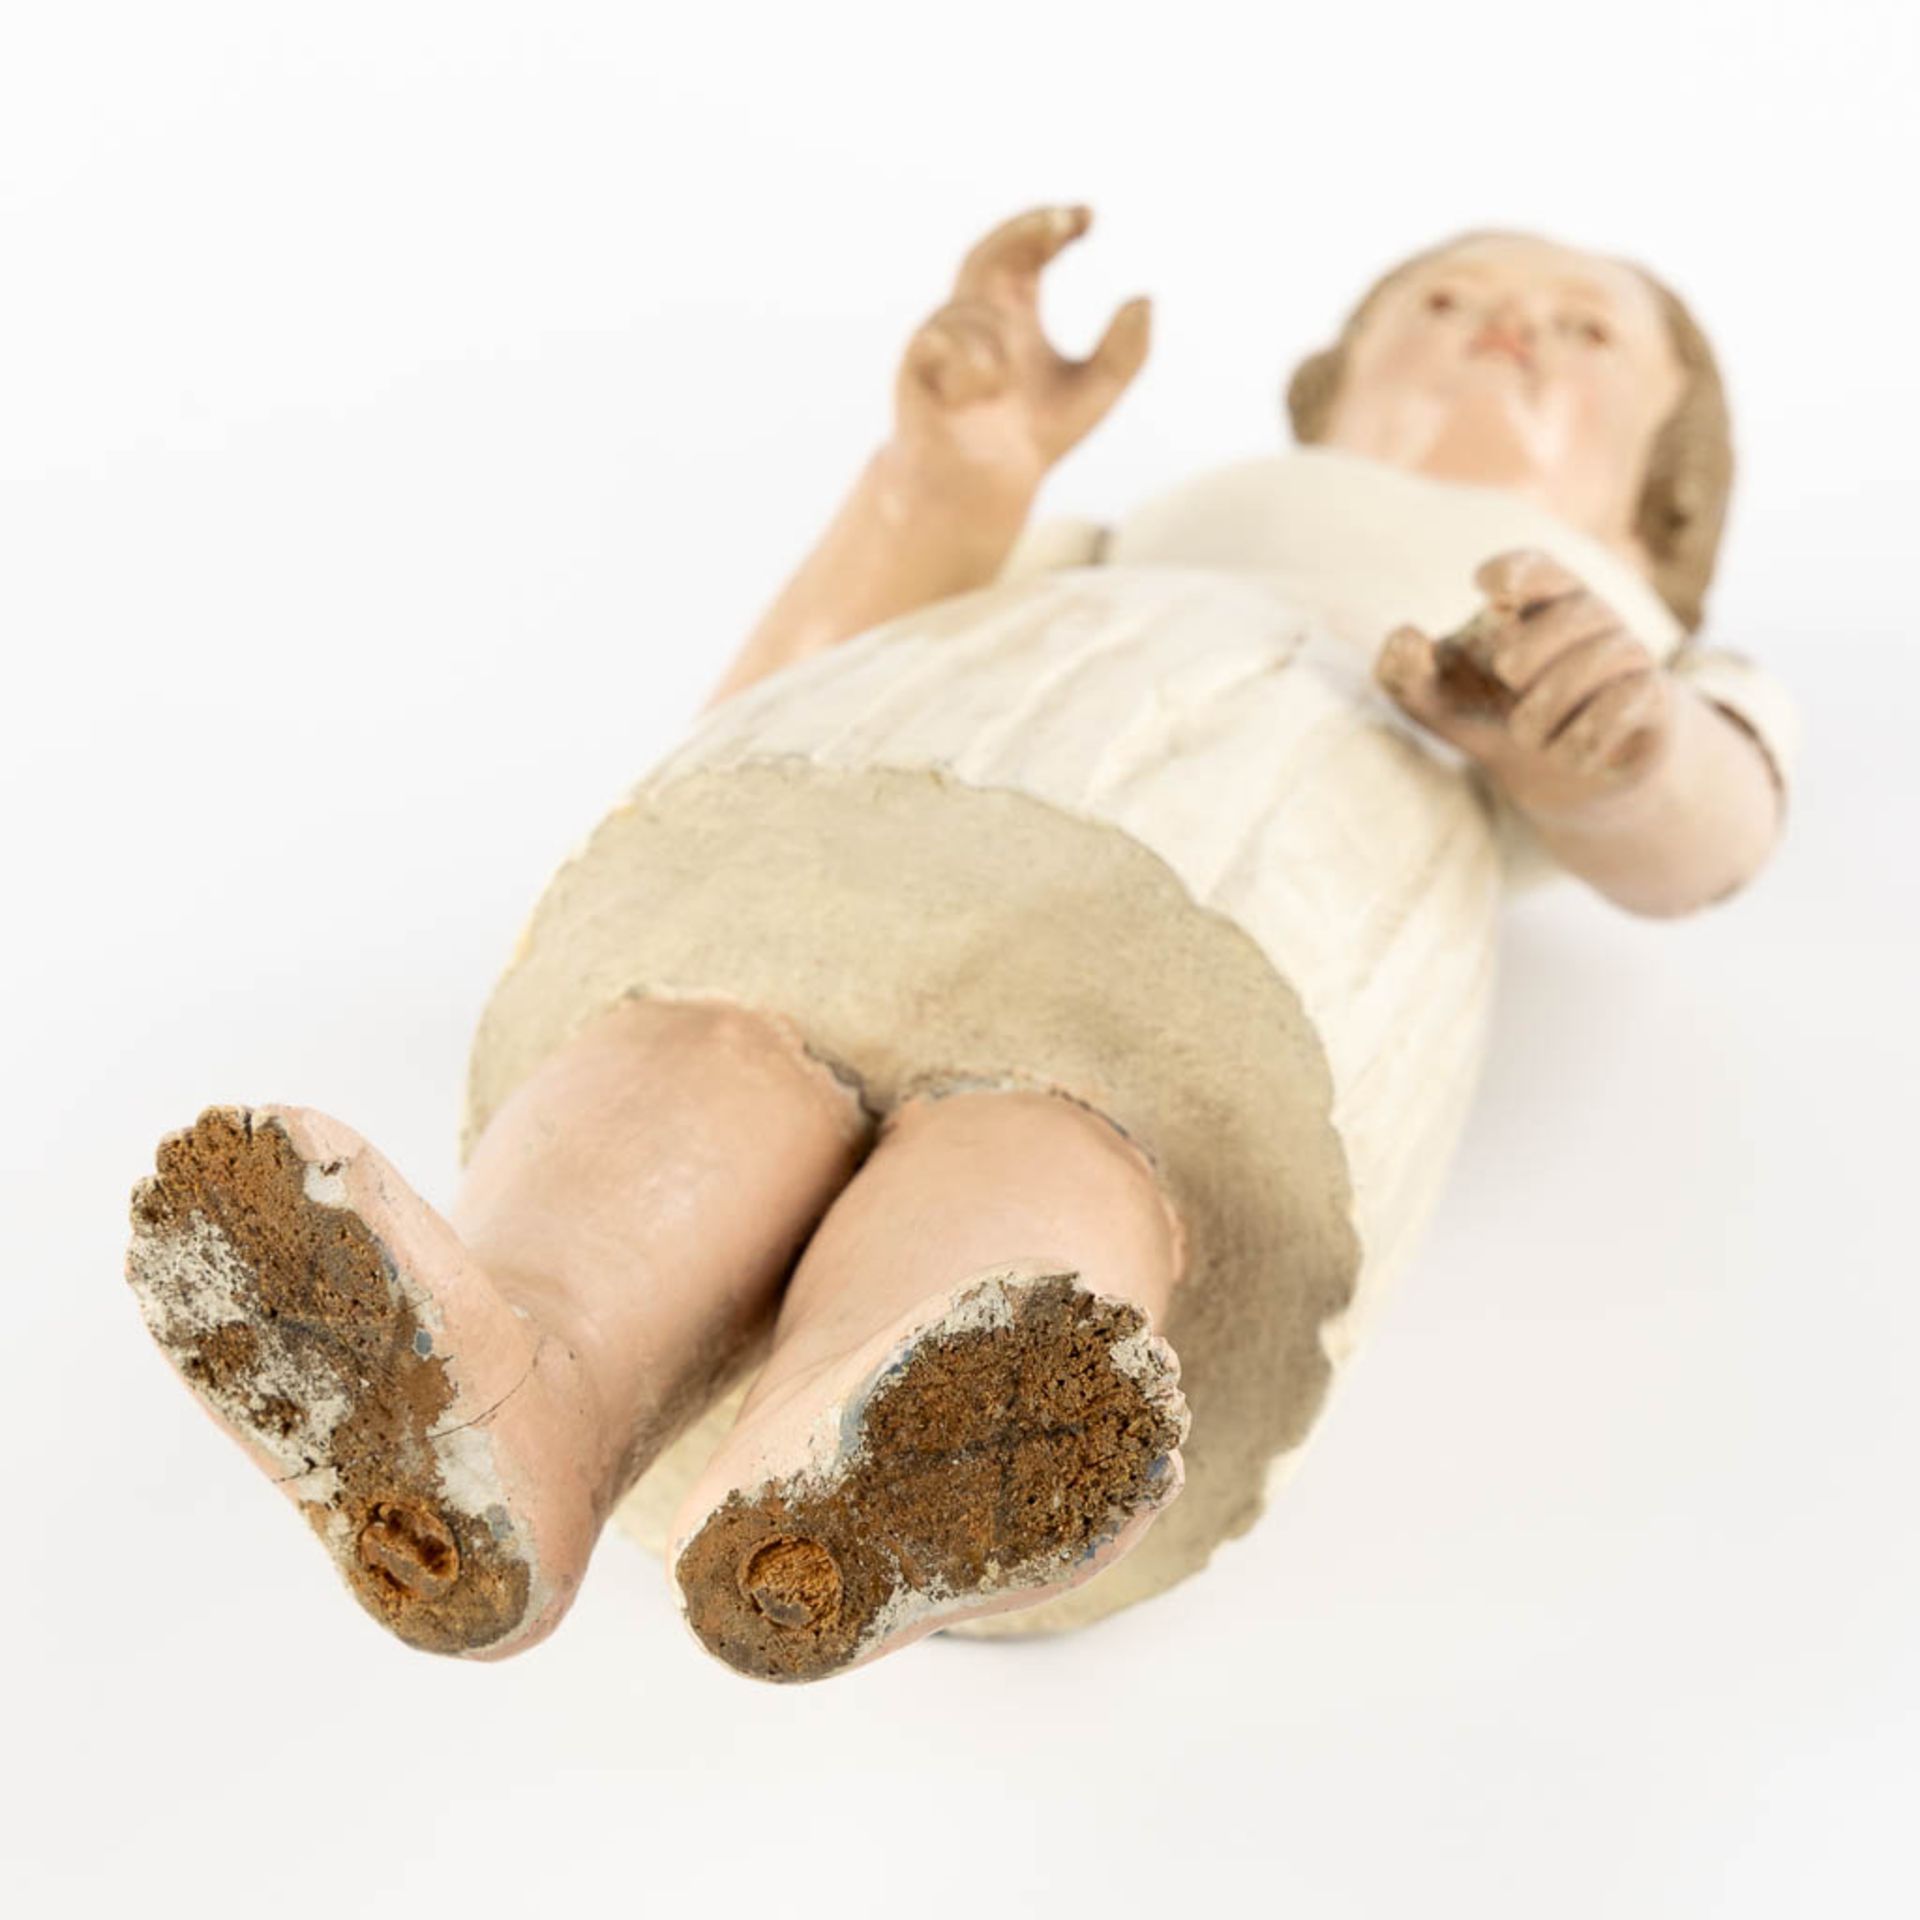 An antique patinated and wood-sculptured doll. 19th C. (L:11,5 x W:17 x H:45 cm) - Image 10 of 12